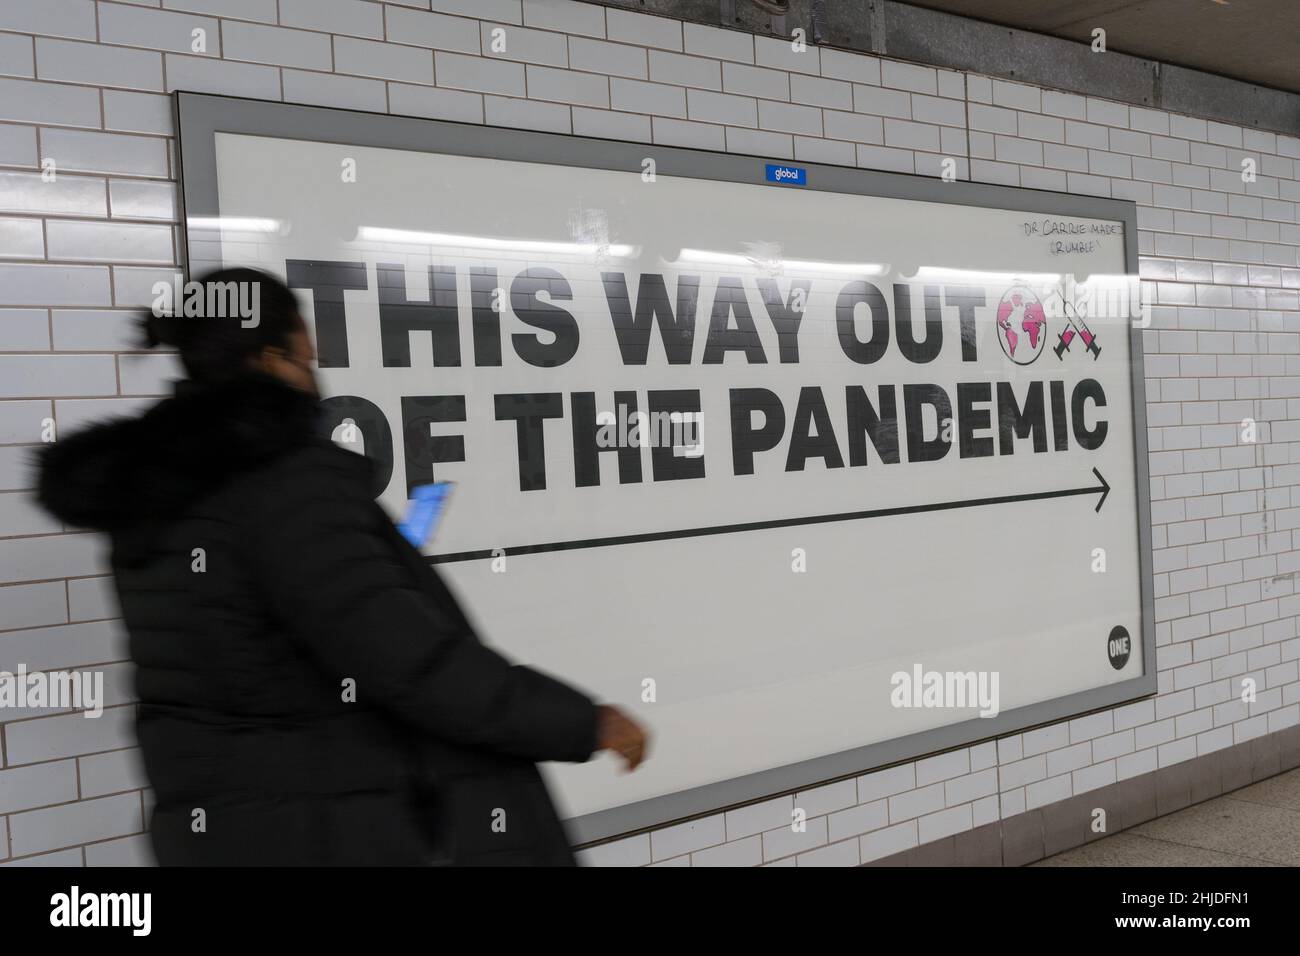 huge poster on the billboard showing 'This way out of the pandemic', England UK self Isolation rules  ending soon Stock Photo